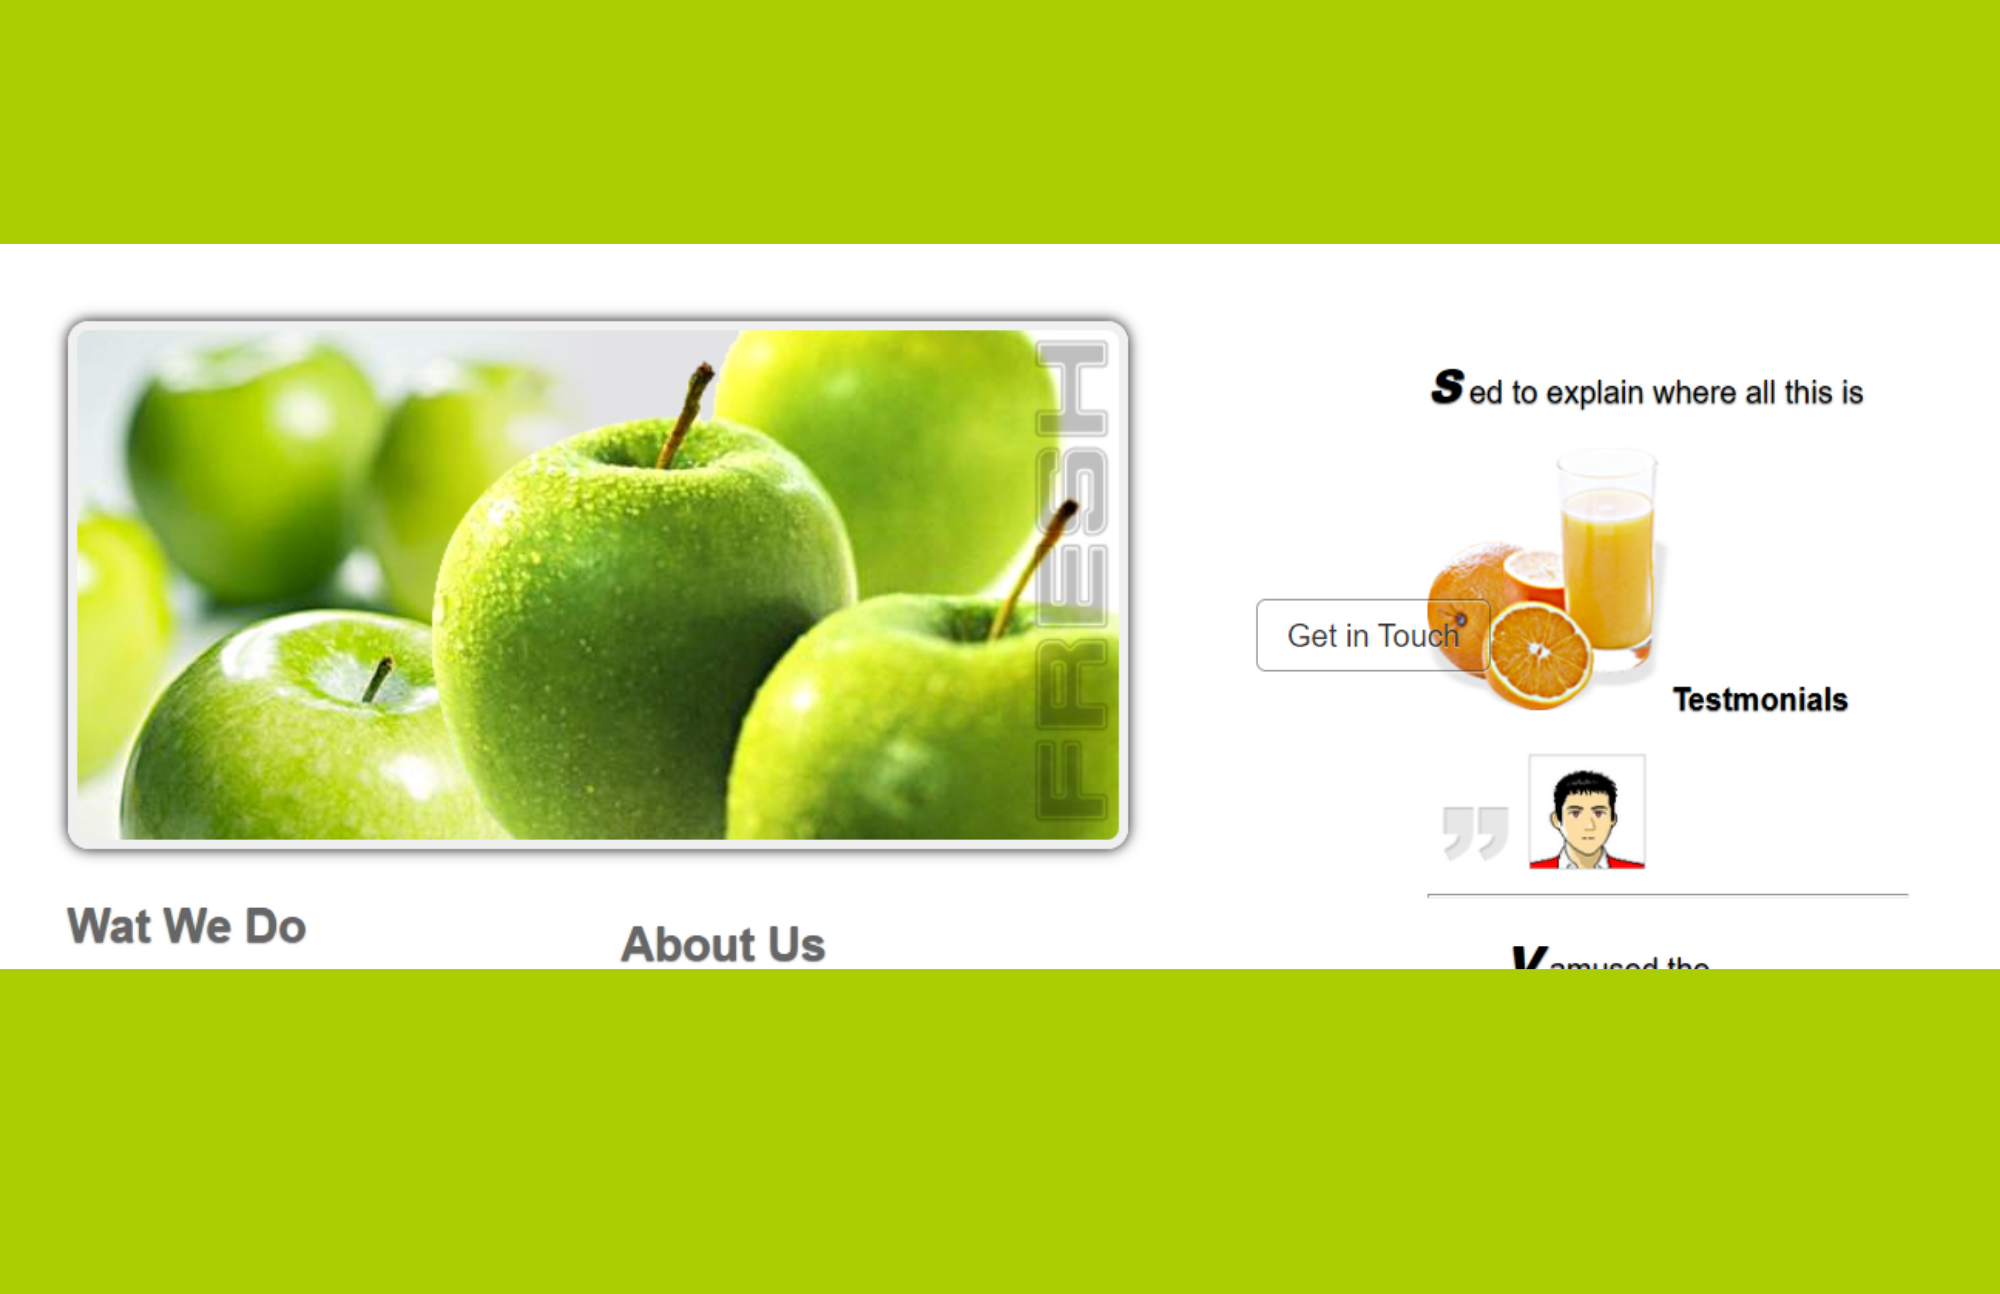 Green apples are used as a featured image in the applegreen template, and other templates surround it